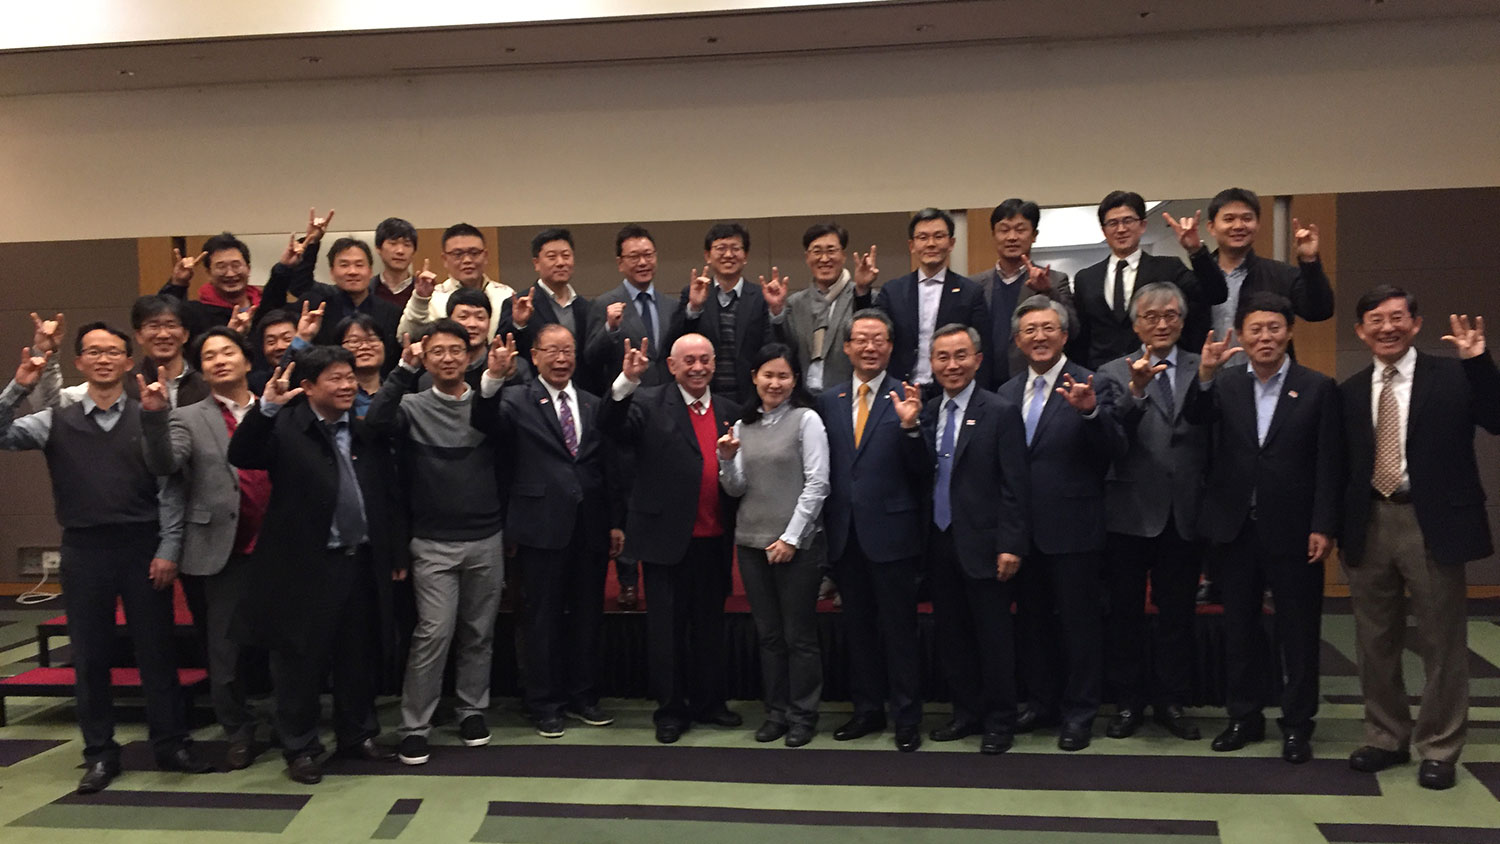 Participants in College of Engineering’s first alumni event held in South Korea show wolf hands.